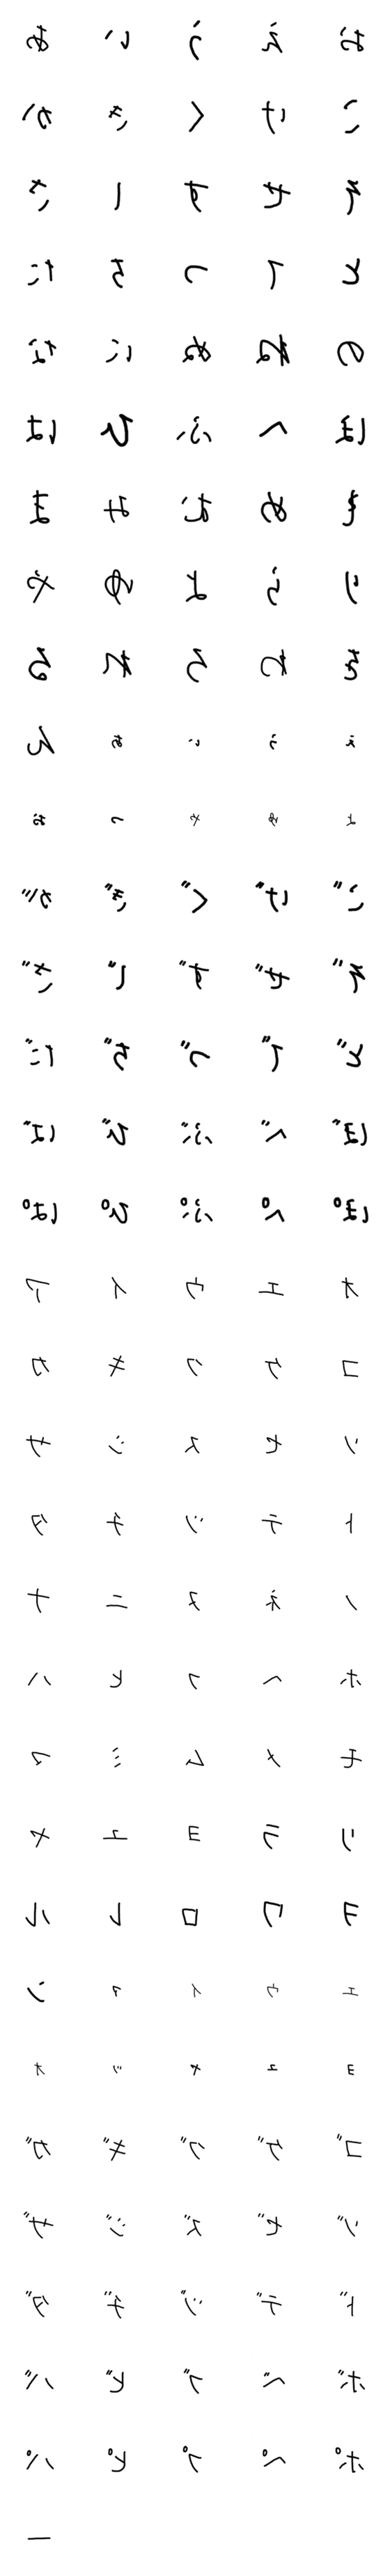 [LINE絵文字]逆さ文字 鏡文字 ひらがなの画像一覧